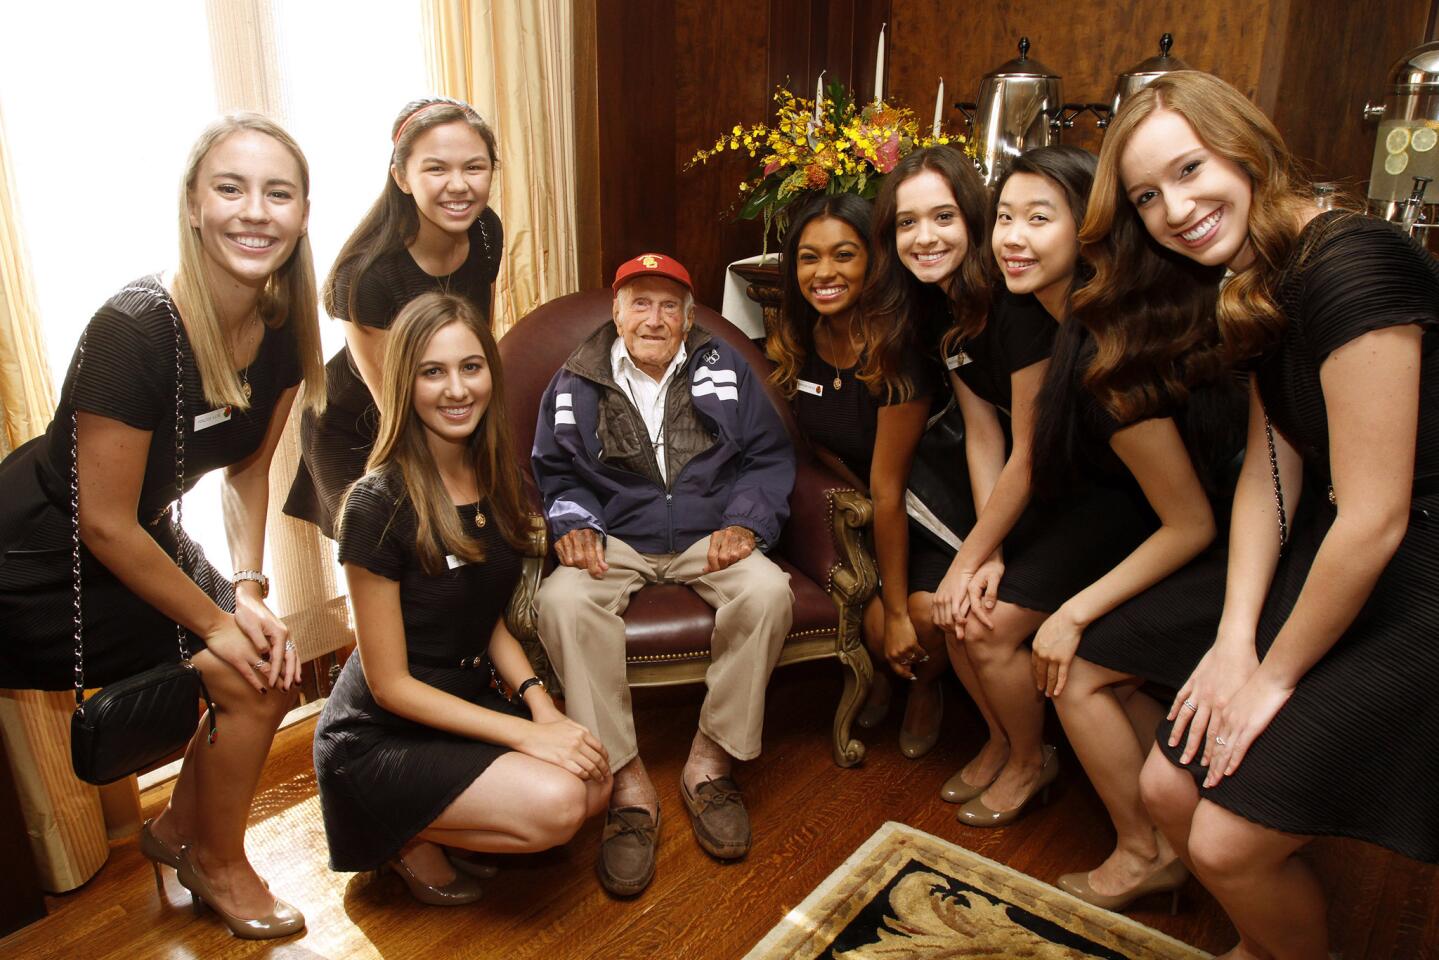 American war hero, World War II prisoner of war and olympian Louis Zamperini, center, was chosen as the Grand Marshal for the 2015 tournament of Roses, in Pasadena on Friday, May 9, 2014. Above, Zamperini enjoys a moment with the 2014 Royal Court at the Tournament House in Pasadena.